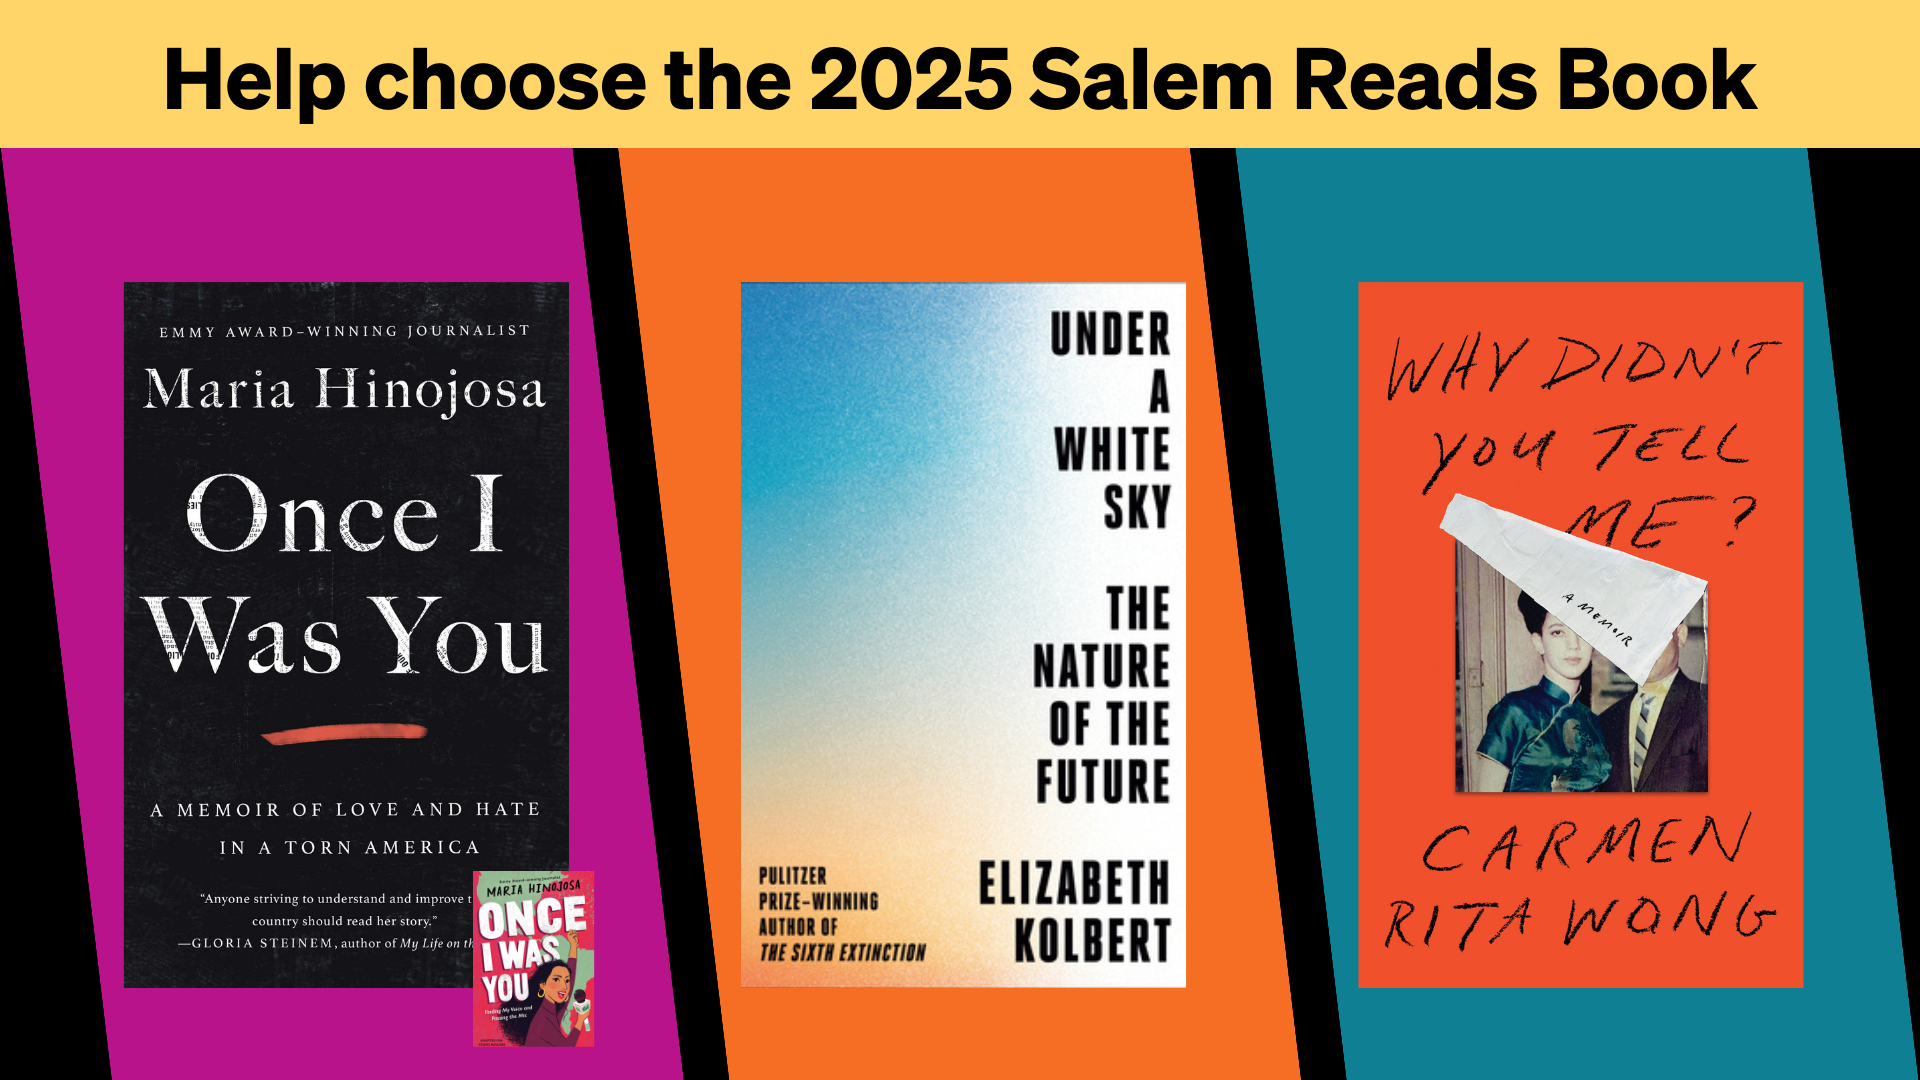 Help choose the 2025 Salem Reads books with images of three book covers